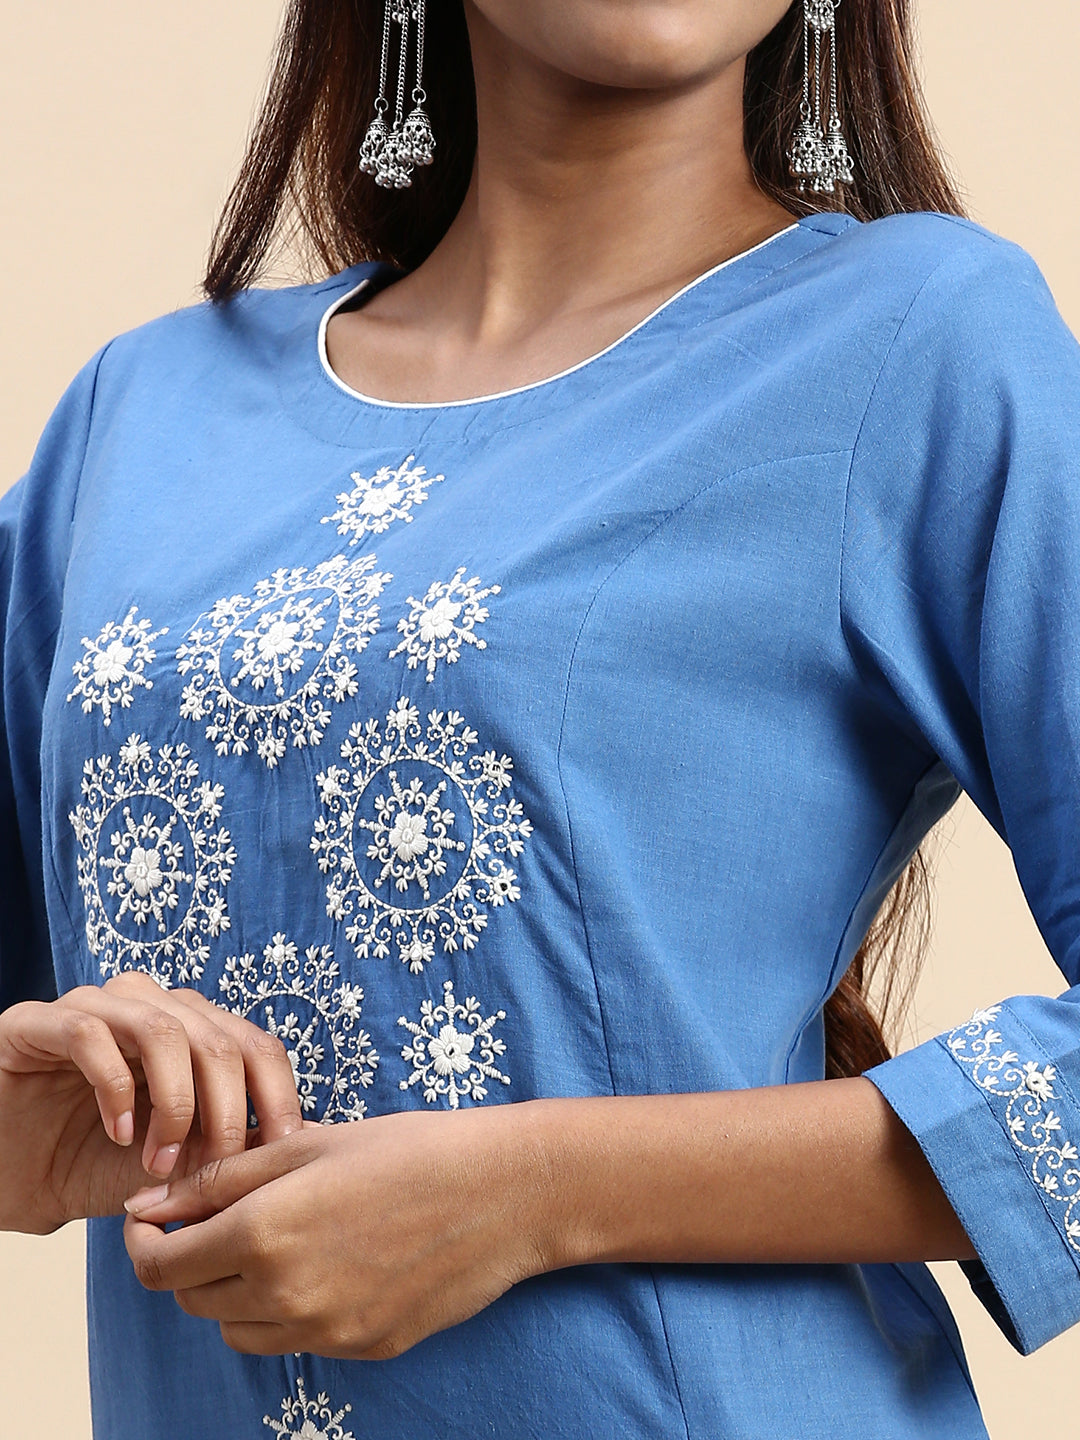 Hand Embroidery neck design malayalam|Simple Party wear kurti Design|Palin  kurti makeover idea | Hand Embroidery neck design in malayalam |Simple idea  to turn plain kurti to a designer one with simple hand